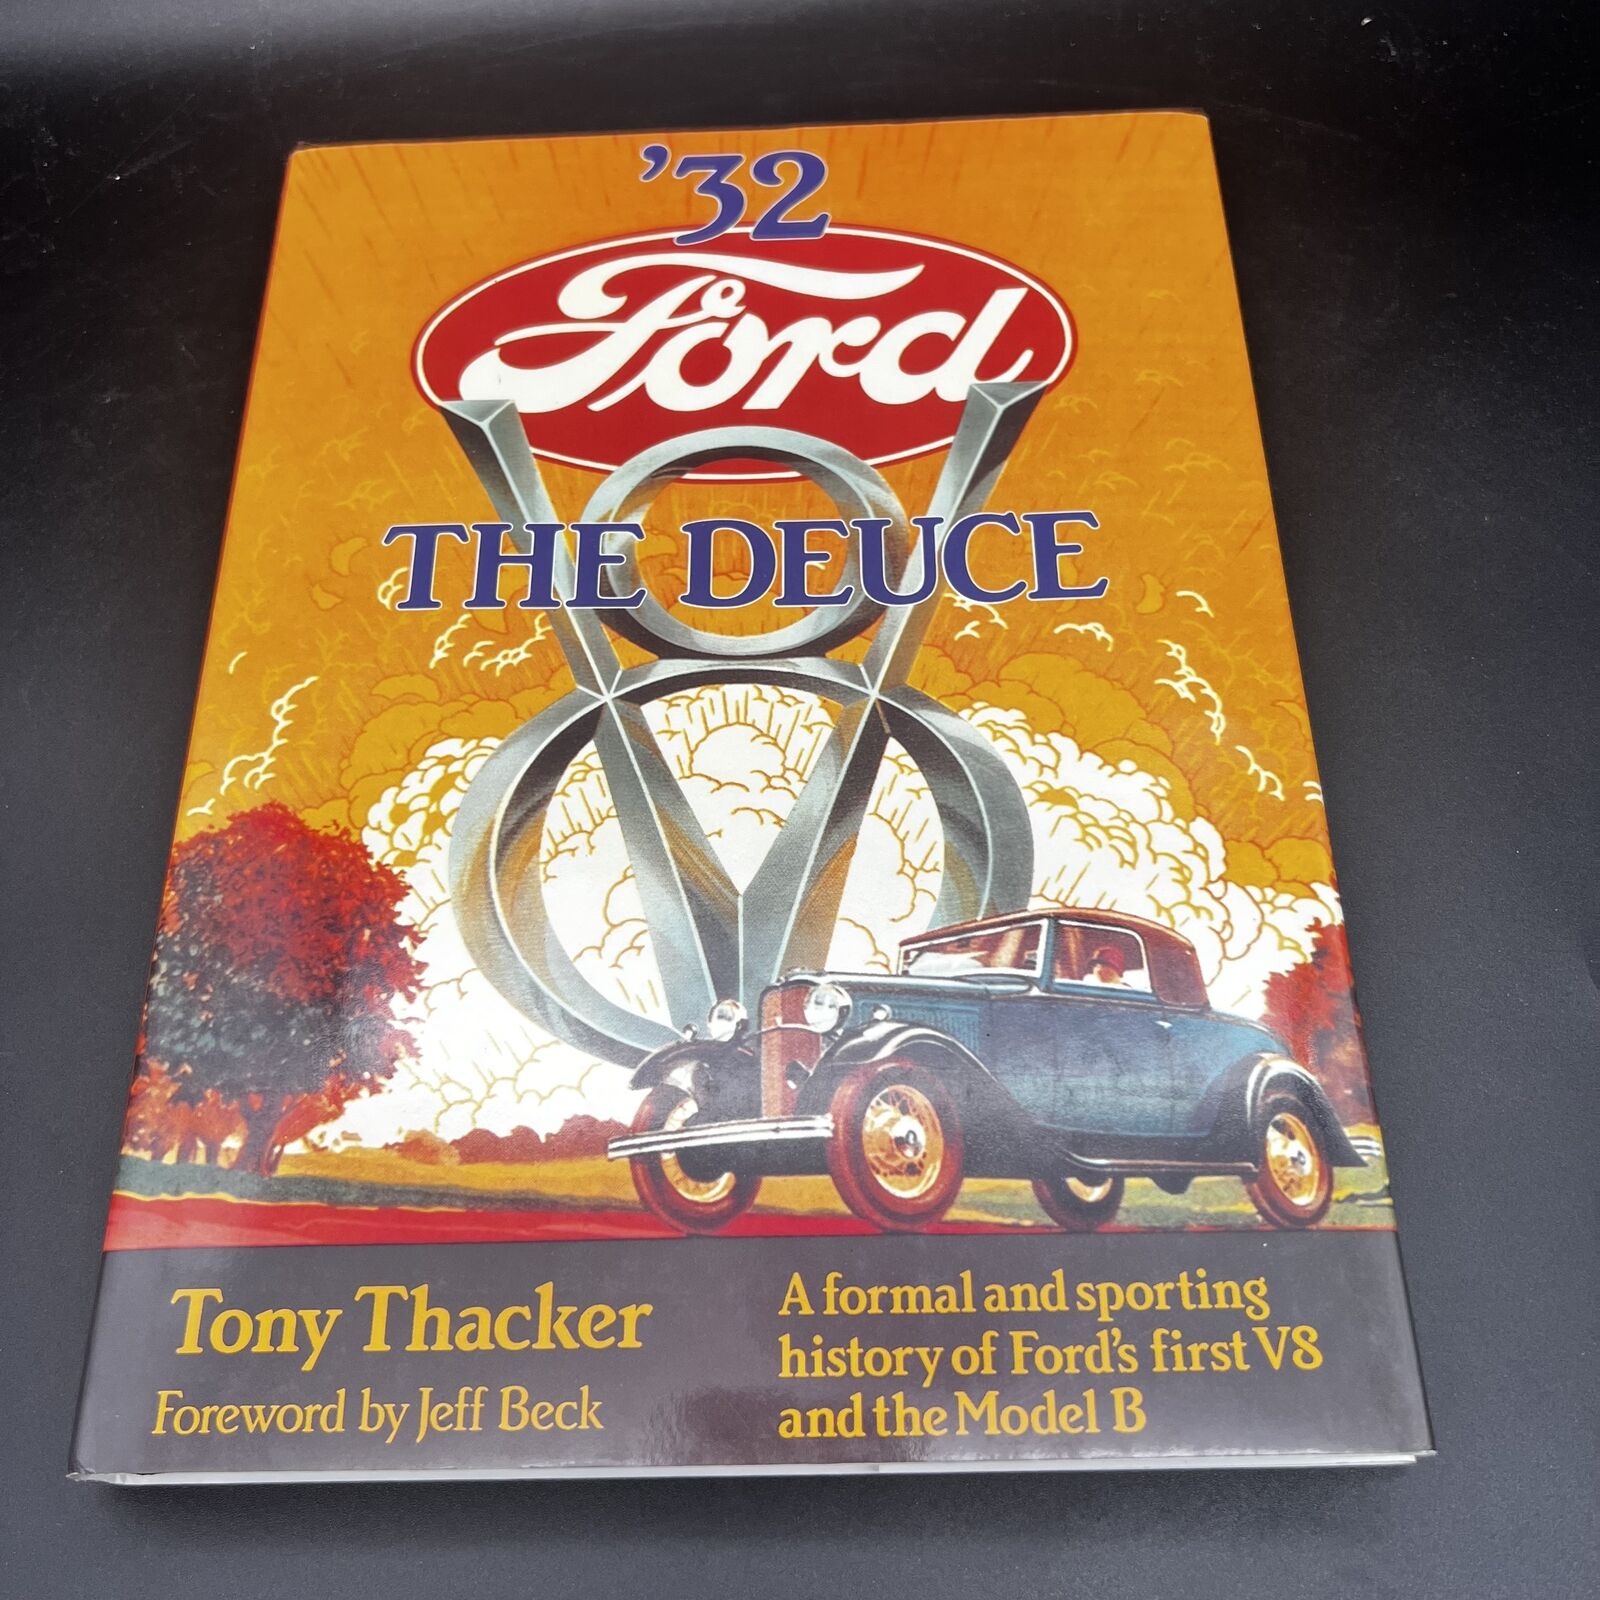 \'32 FORD THE DEUCE: A FORMAL AND SPORTING HISTORY OF FORD By Tony Thacker  HC